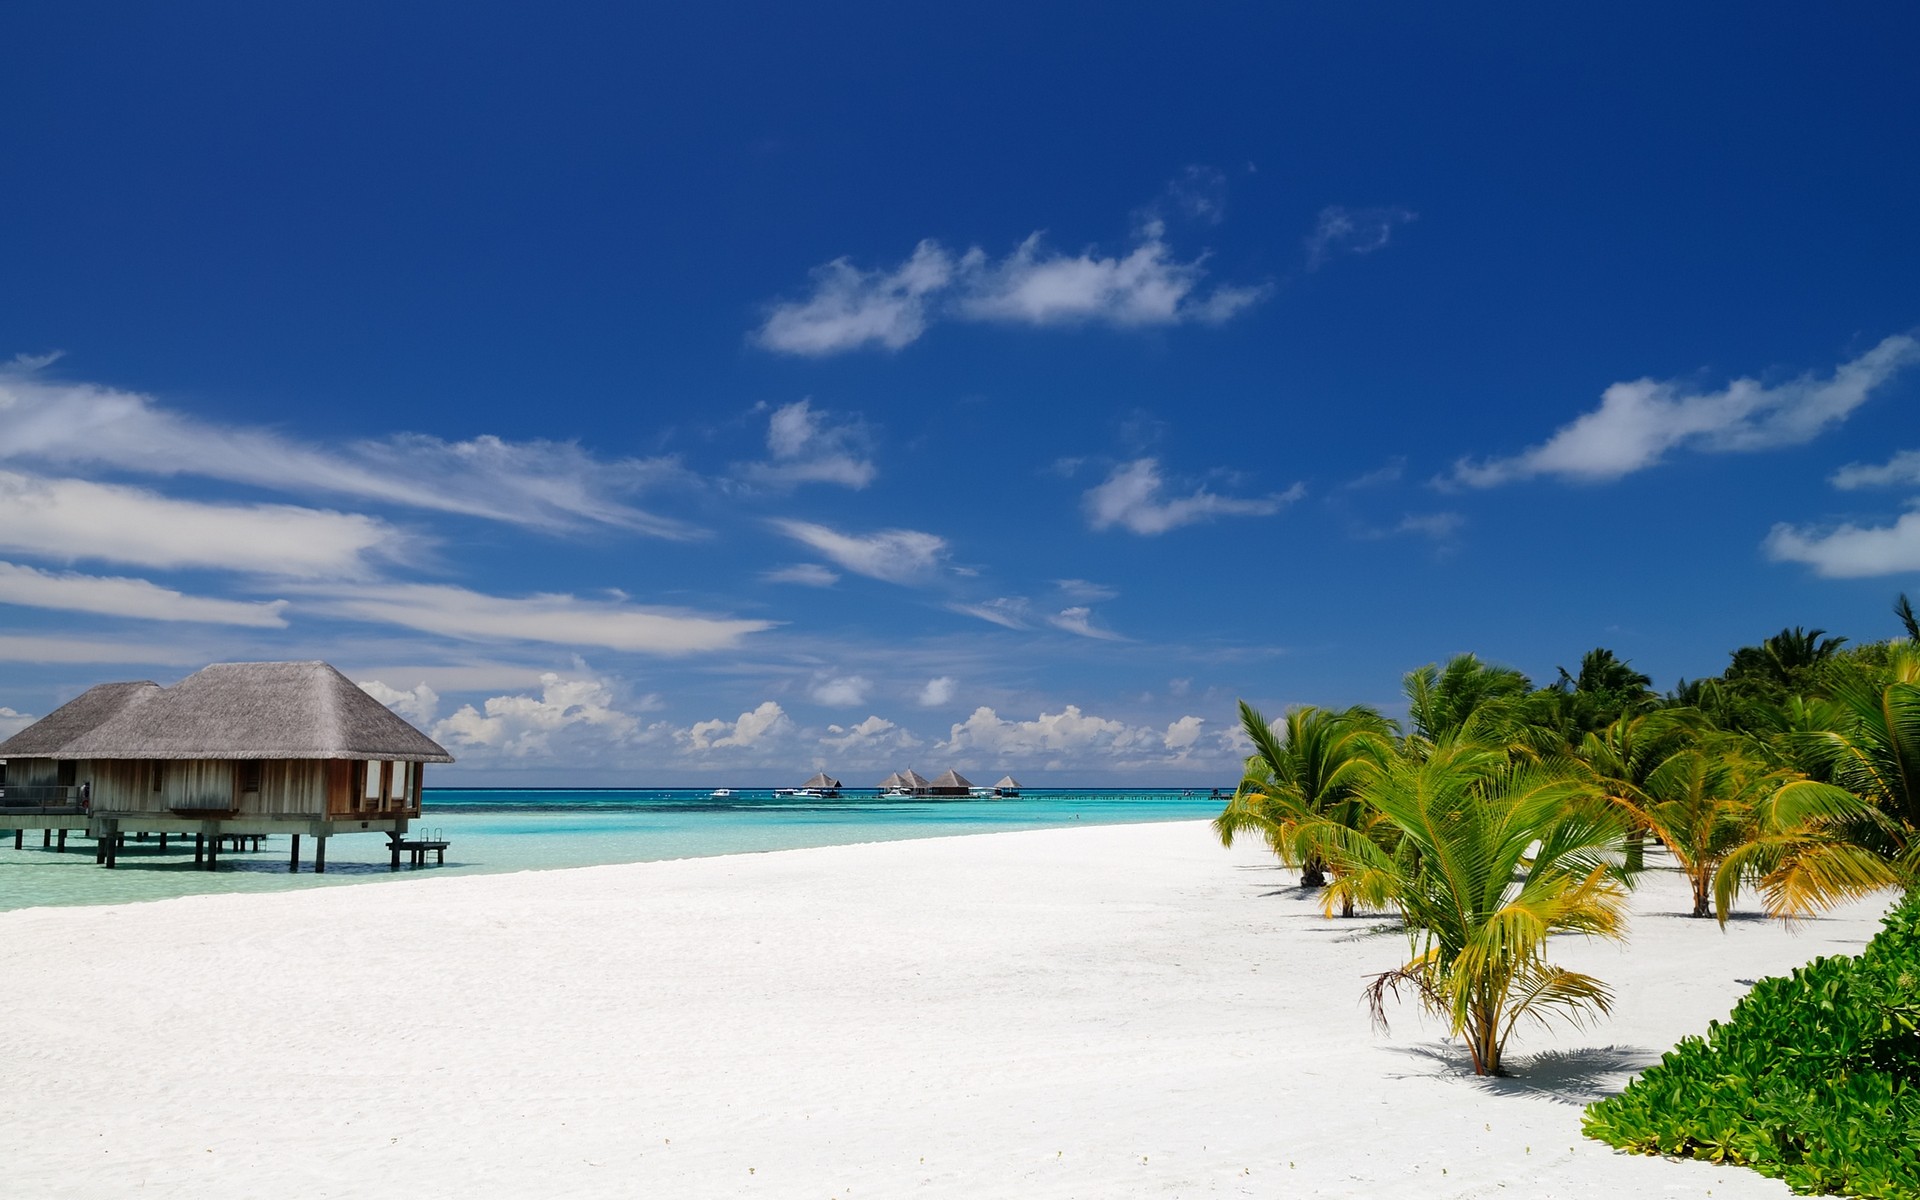 General 1920x1200 nature beach Maldives palm trees sand tropical resort sea summer bungalow architecture island